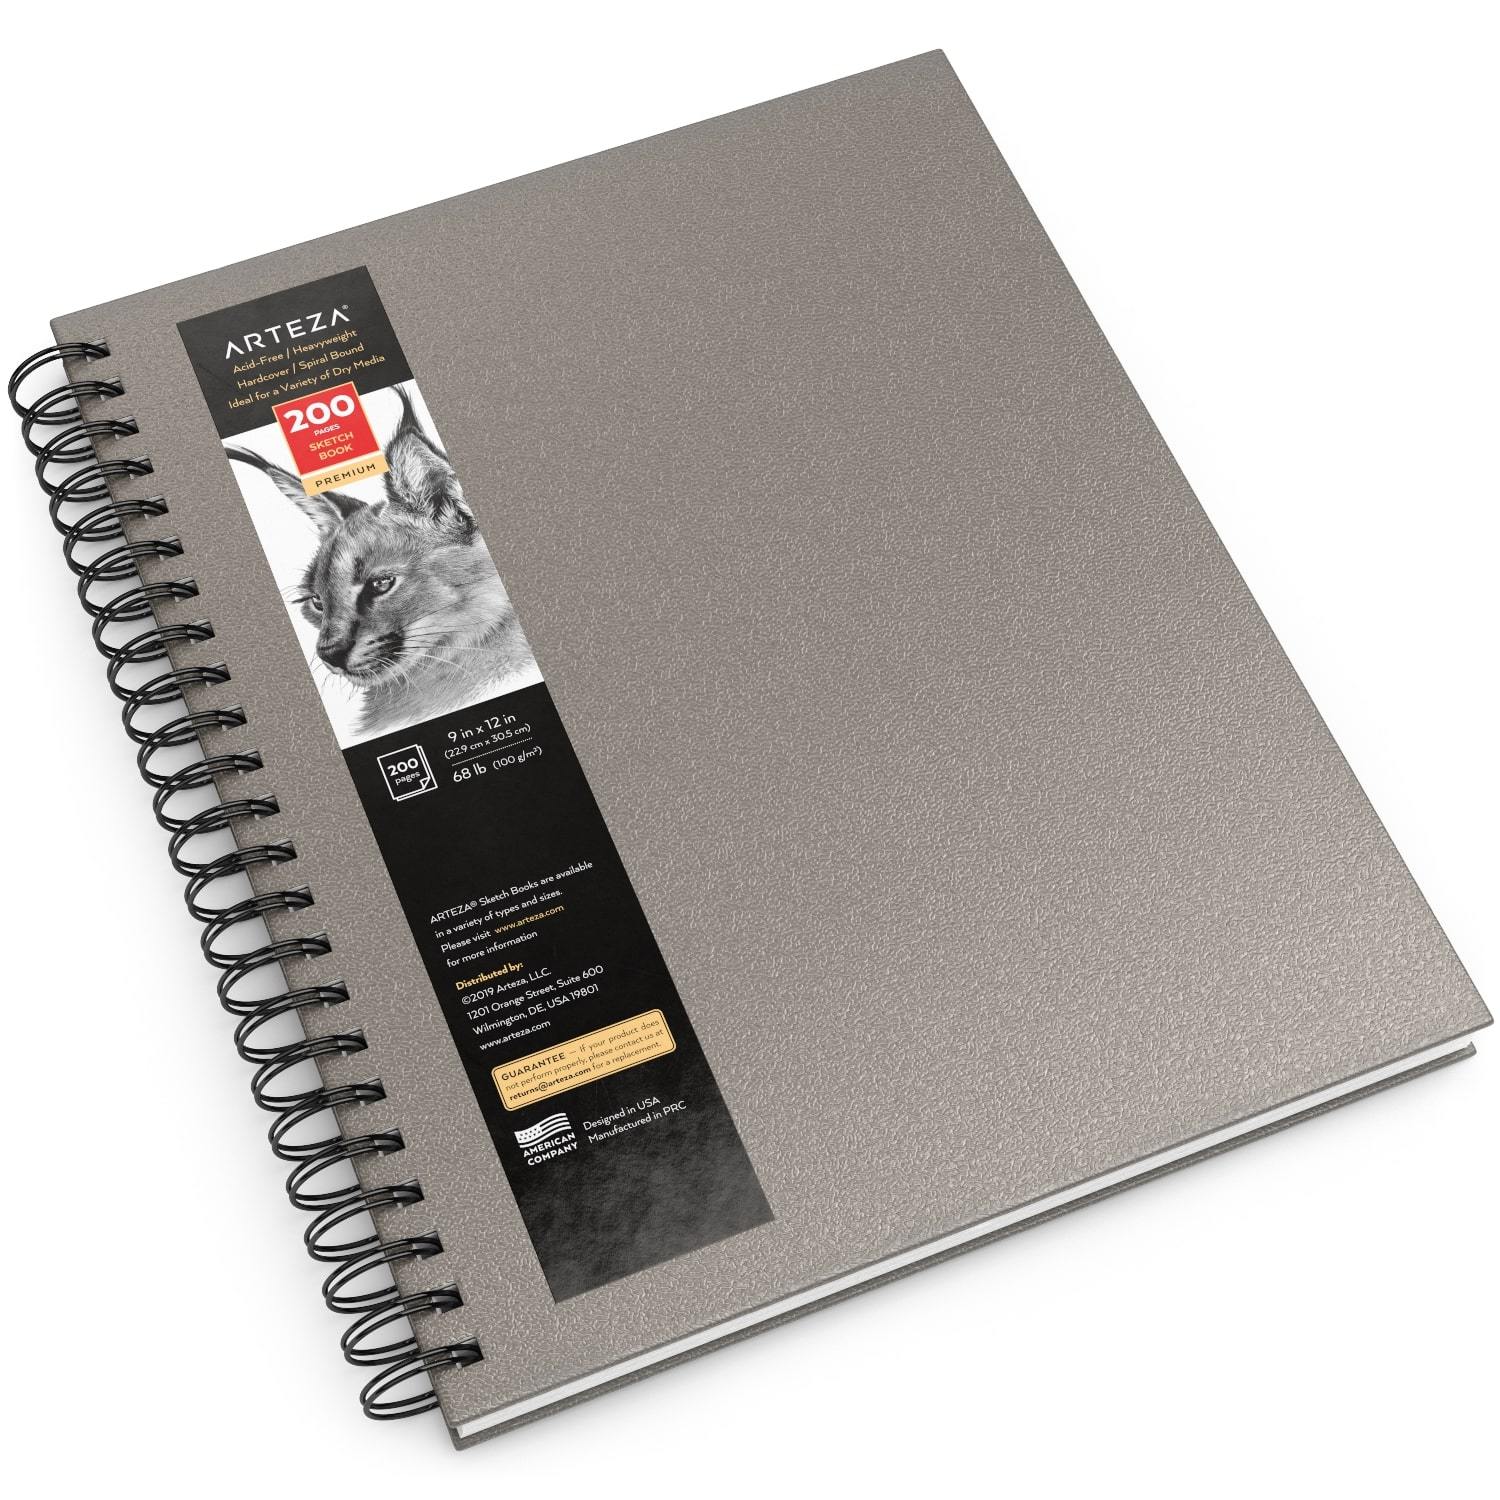 3 PACK - Incraftables Art Sketchbook (125 Pages) Spiral Bound. Hardcover  Perforated Paper Pad (8.5” x 11” Big) Art Sketch Book for Artists &  Beginners. Heavy Duty Sketch Notebook for Drawing & Panting (A4)